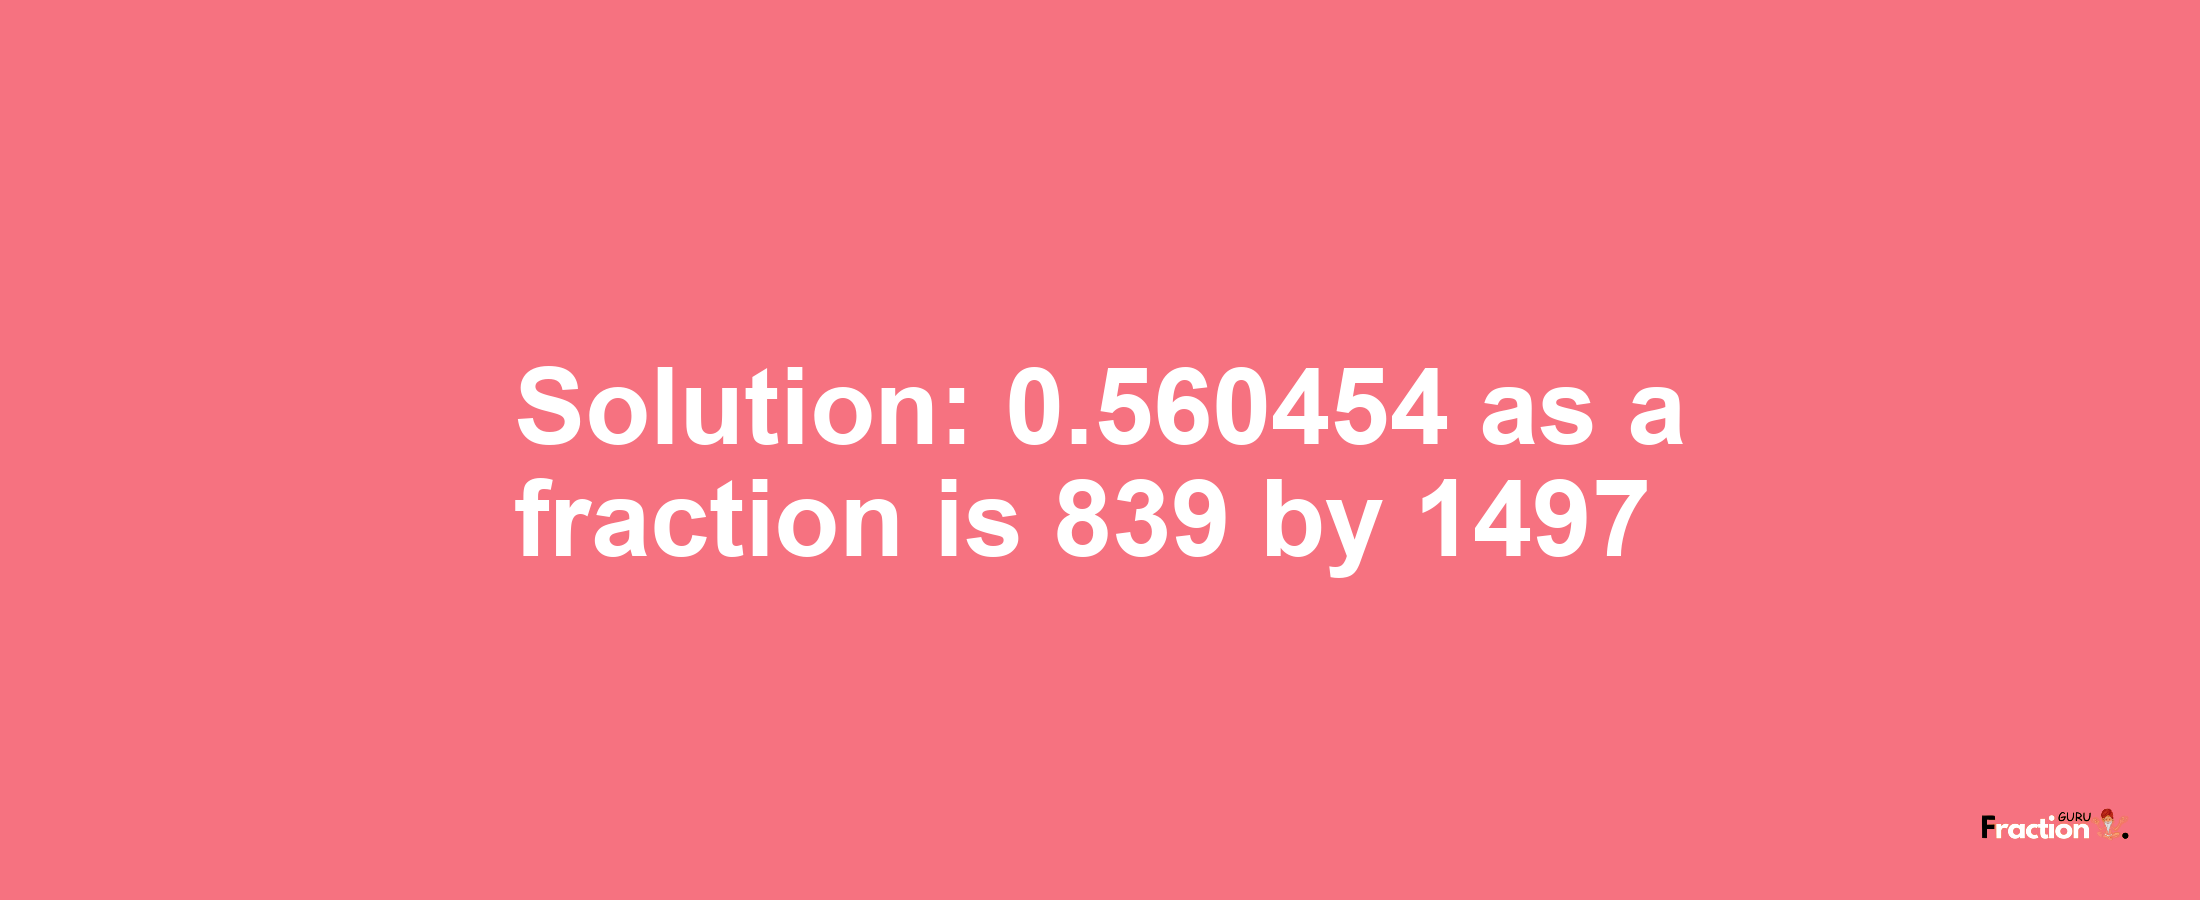 Solution:0.560454 as a fraction is 839/1497